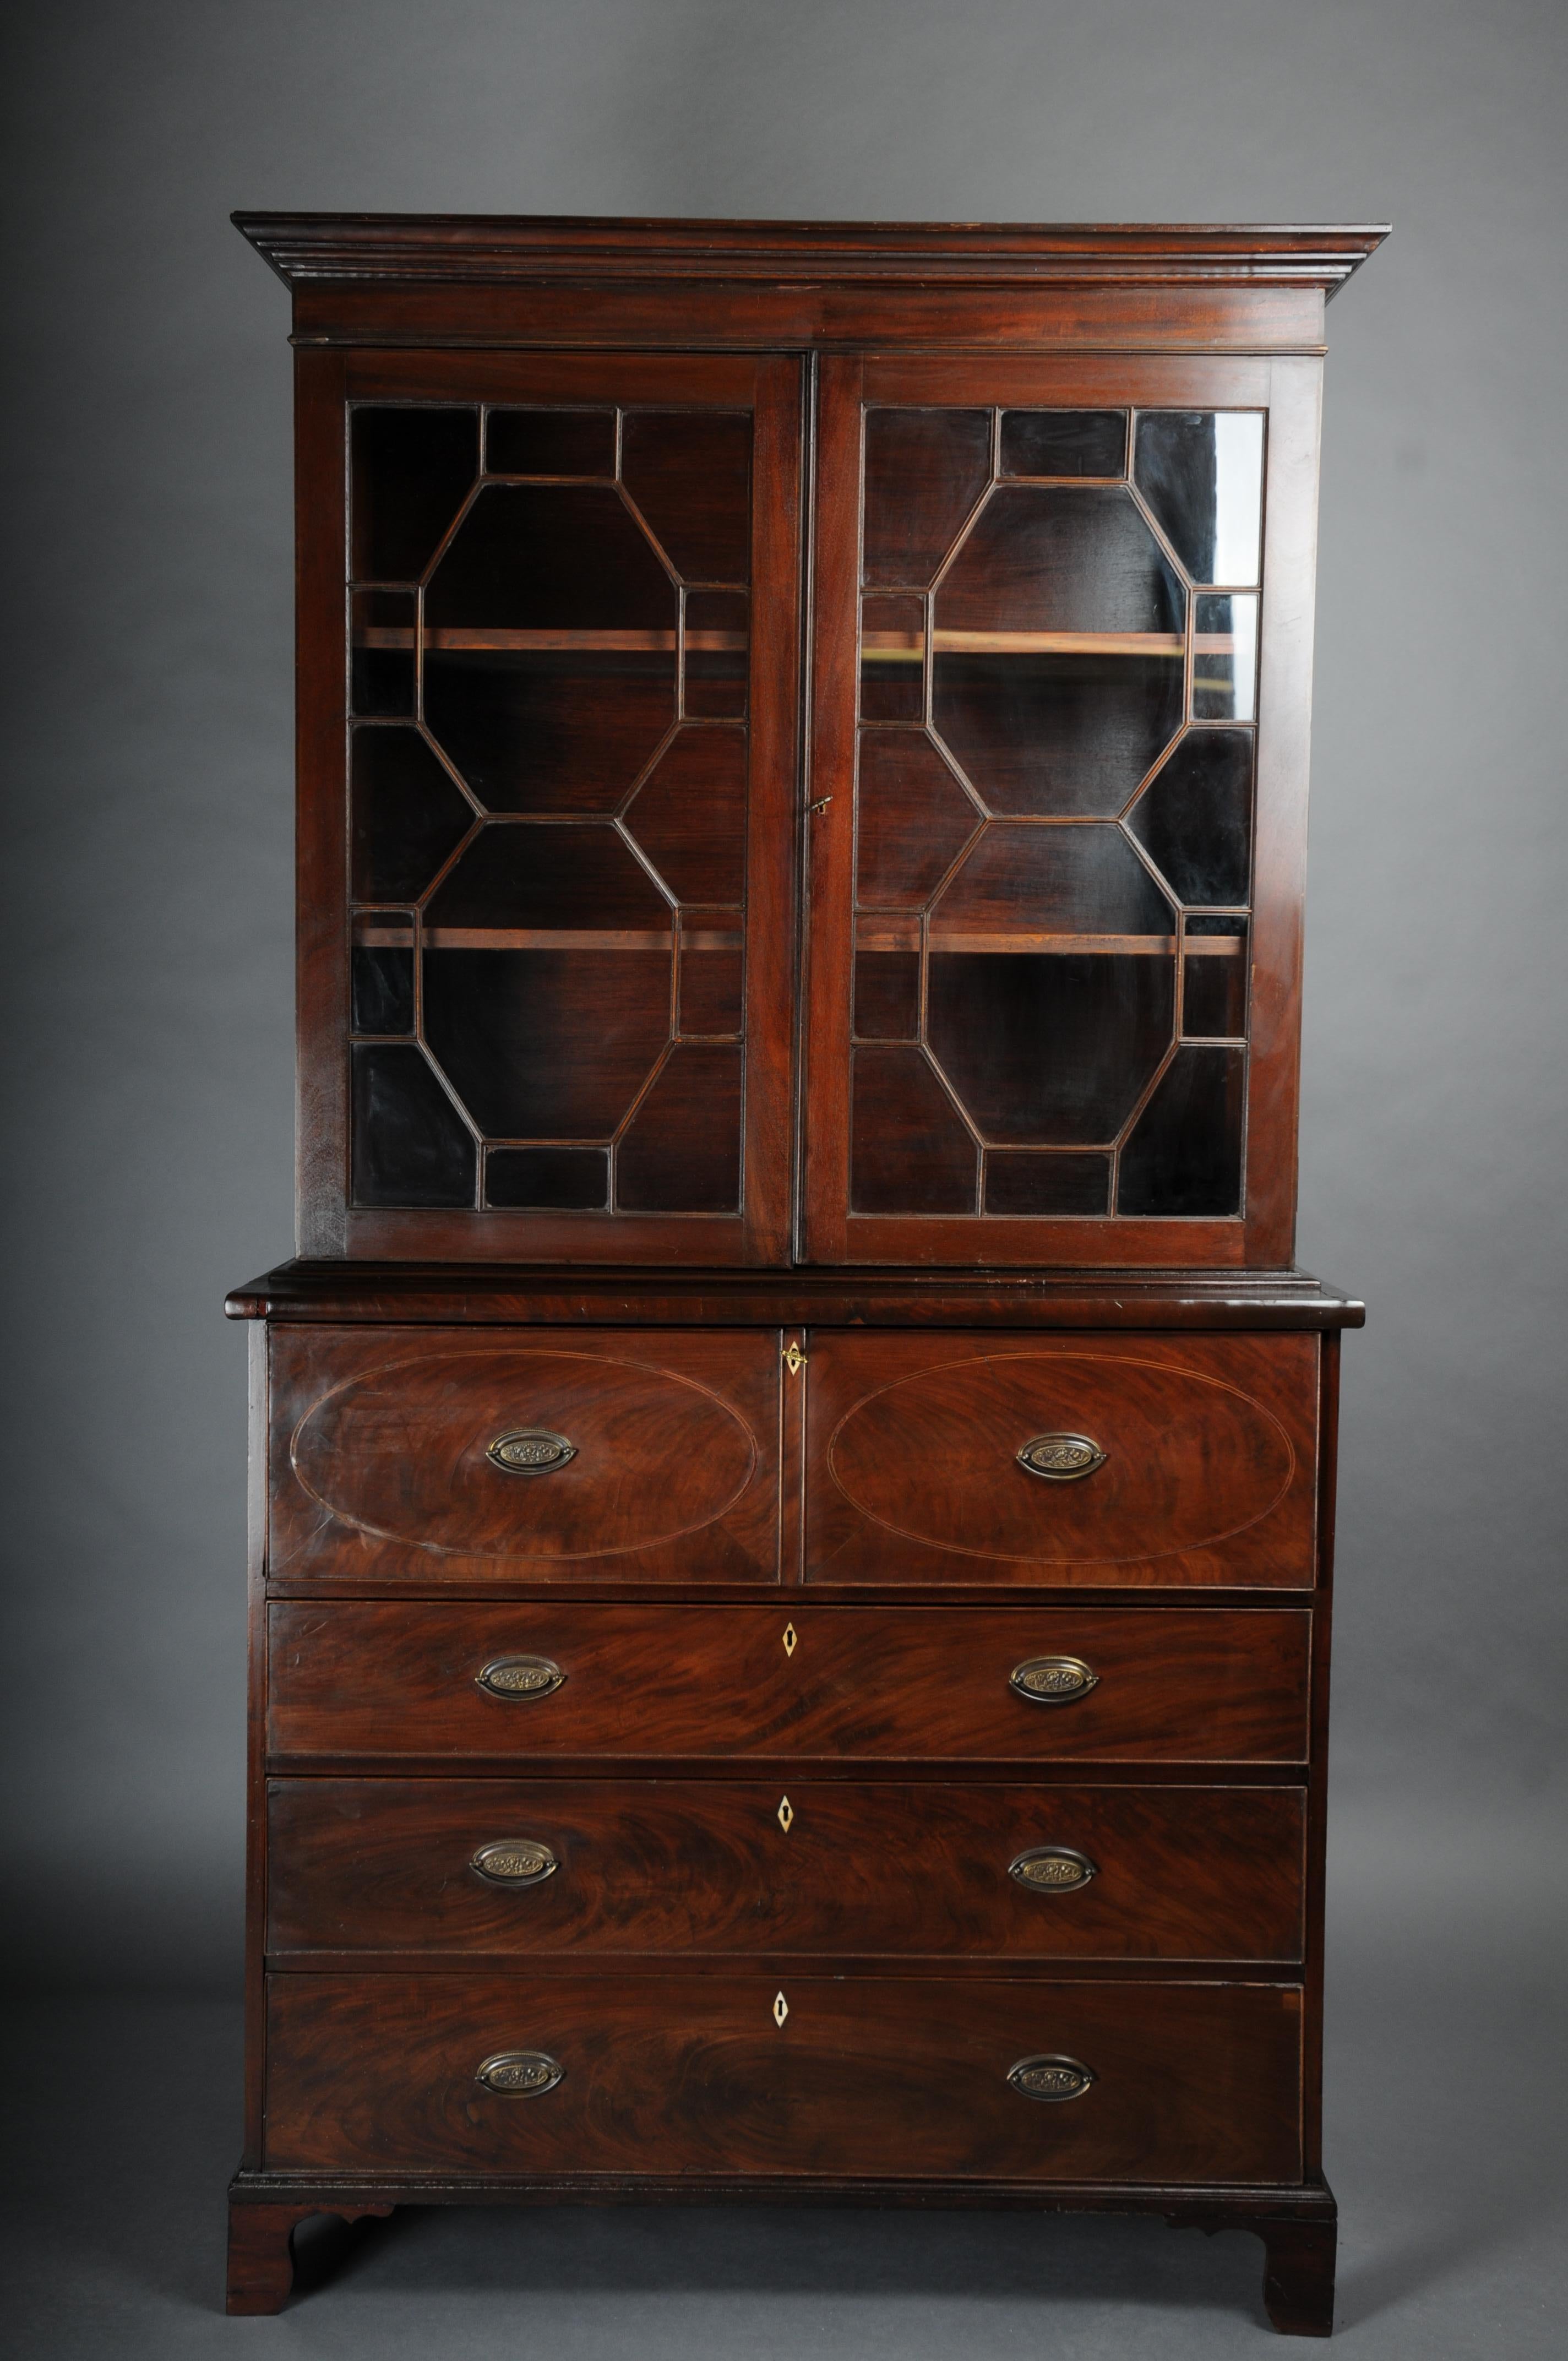 19th Century Antique English Display Secretaire, Mahogany

Solid wood, manufactured to a high quality. The display cabinet has a pull-out function and can be used as a secretary thanks to the integrated writing surface.

Above, glazed cupboard door